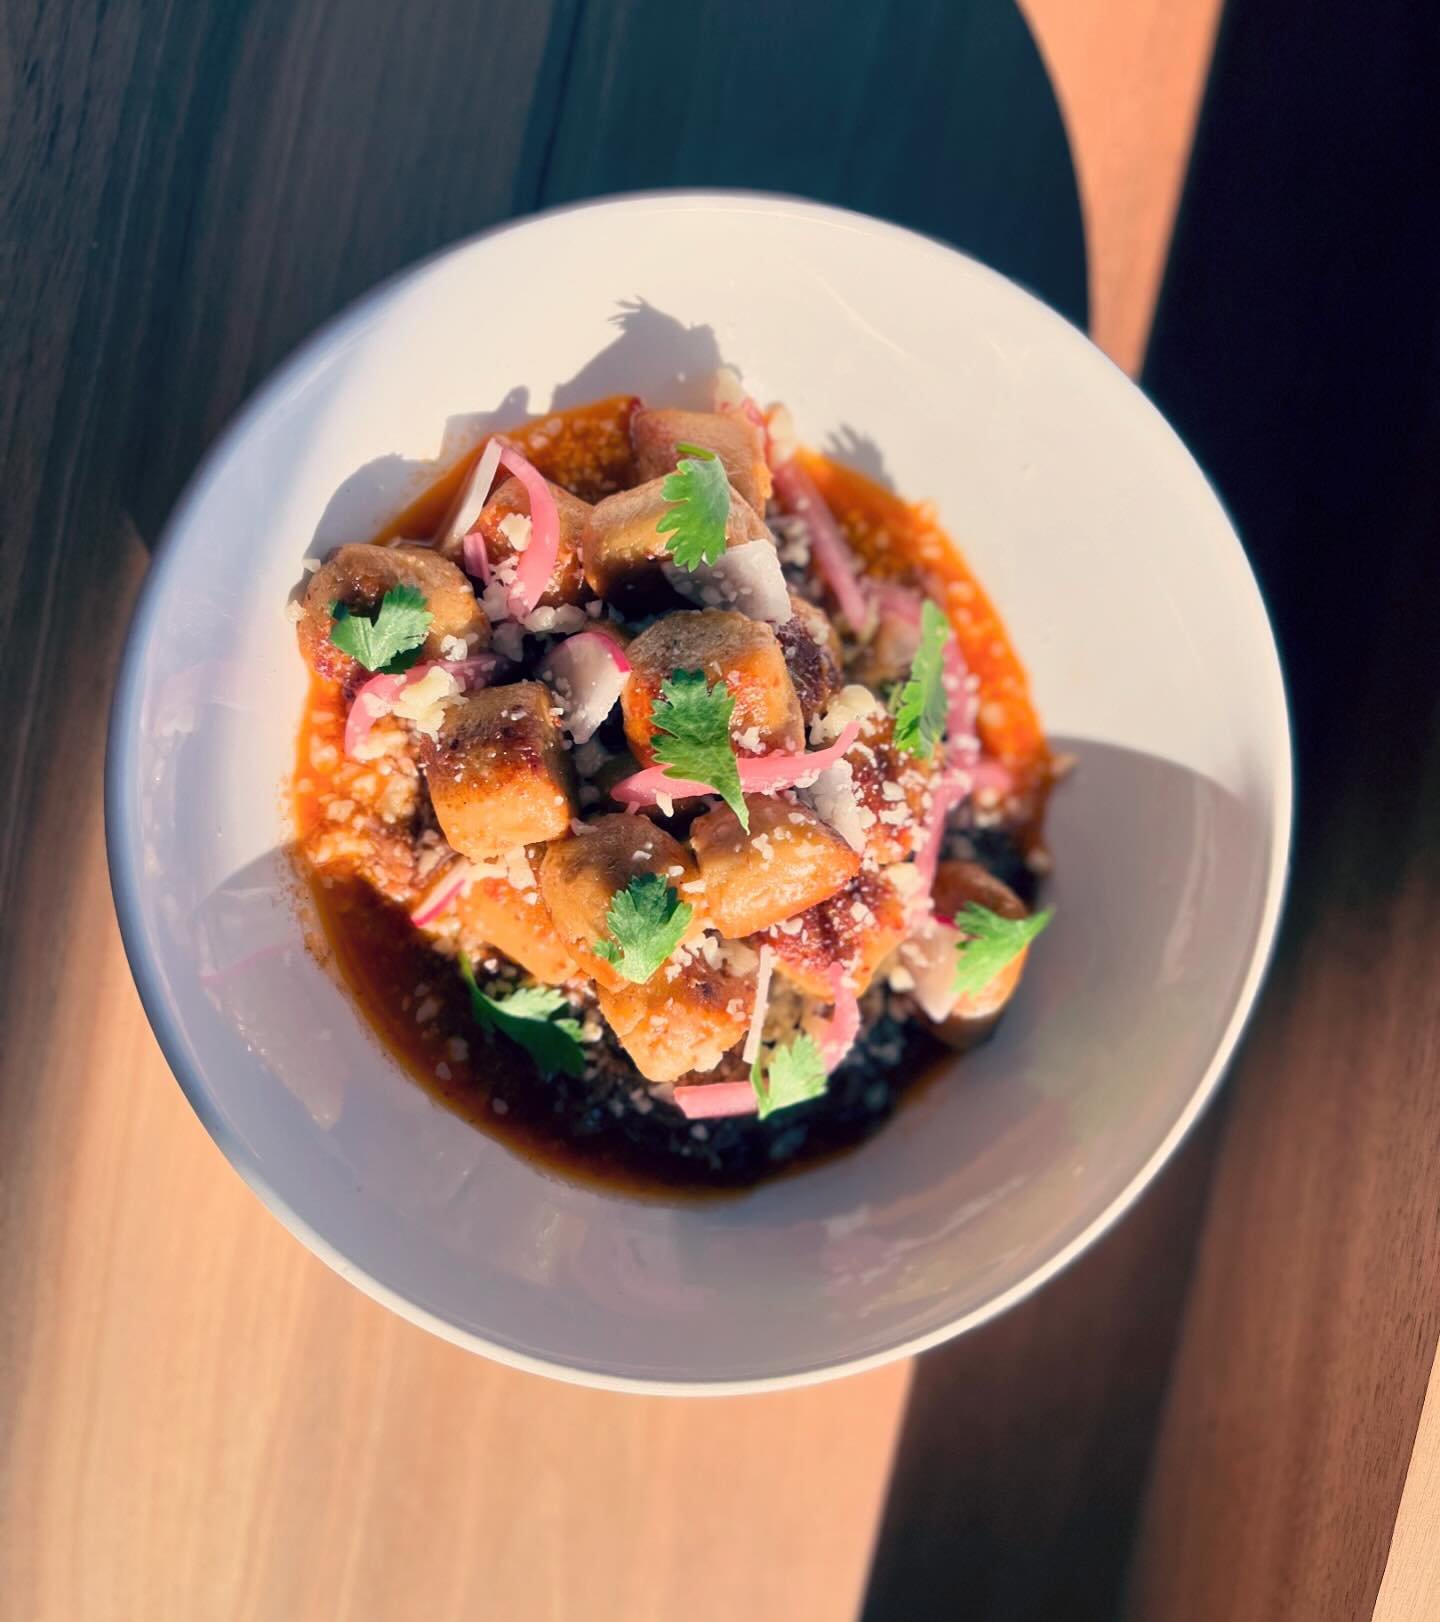 Birria Gnocchi: masa, pickled red onion, cotija cheese and cilantro. Available this weekend, Thursday-Saturday 5pm-9pm! 

Order online: www.theearlybirdeatery.com/moonlighter

#birria #gnocchi #comfort #comfortfood #goodfood #nightmoves #moonlighter 